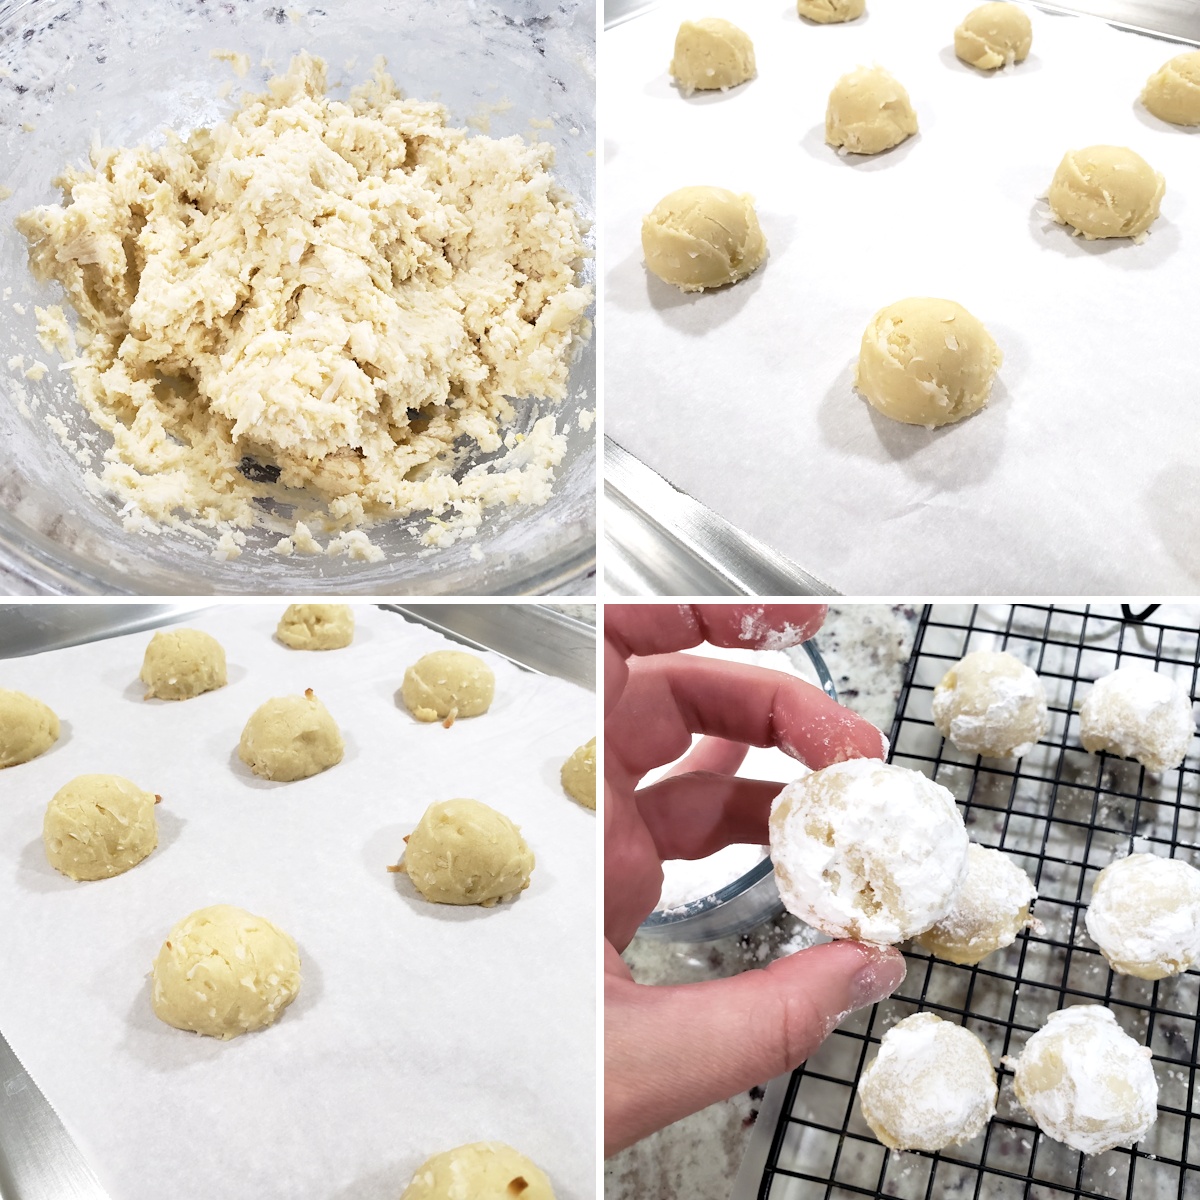 Rolling dough into balls and baking on a baking sheet.